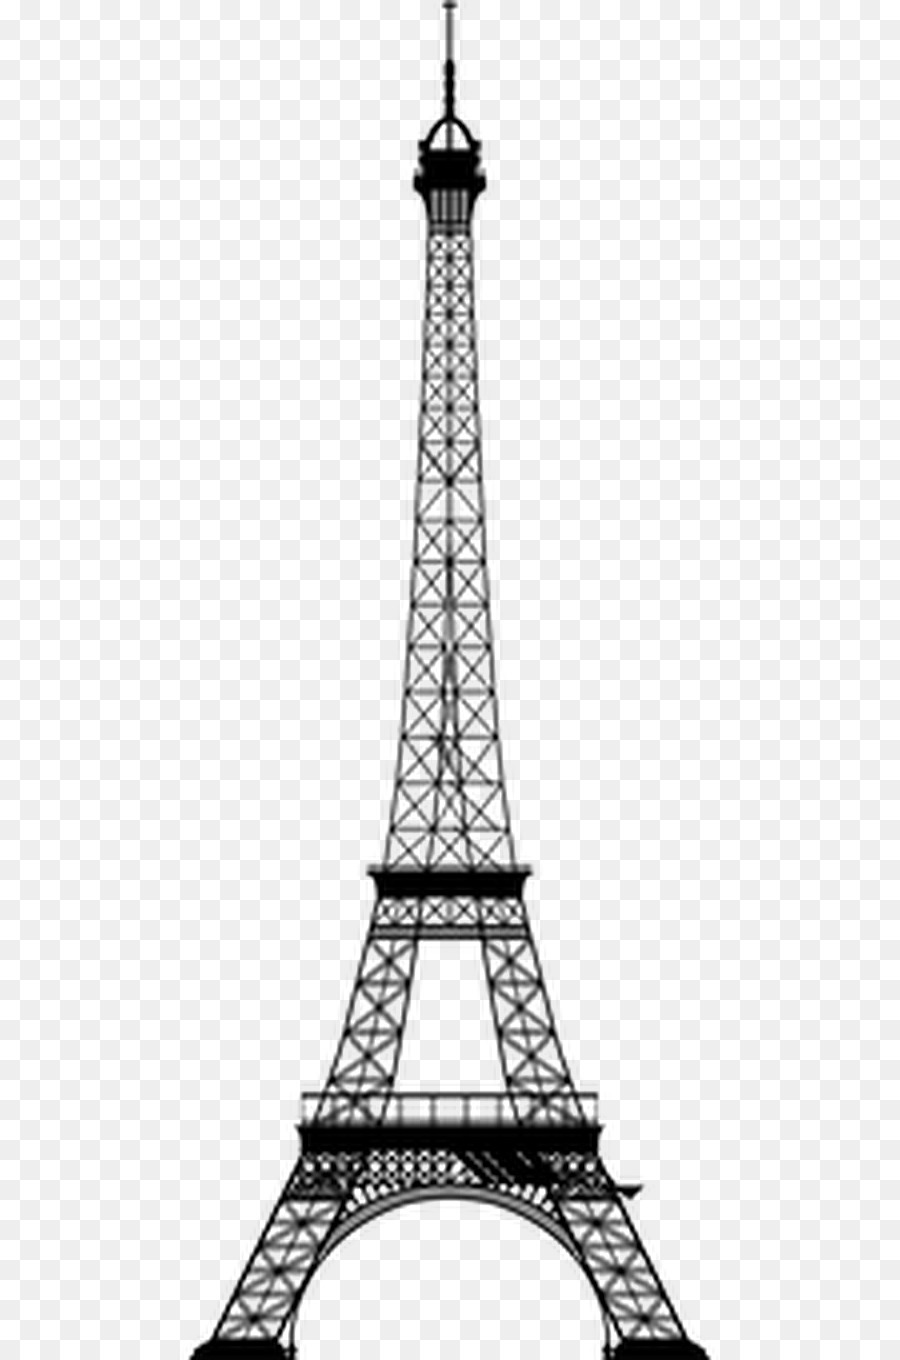 Eiffel Tower Image Portable Network Graphics Vector graphics - drawing eiffel tower png clip art png download - 680*1360 - Free Transparent Eiffel Tower png Download.